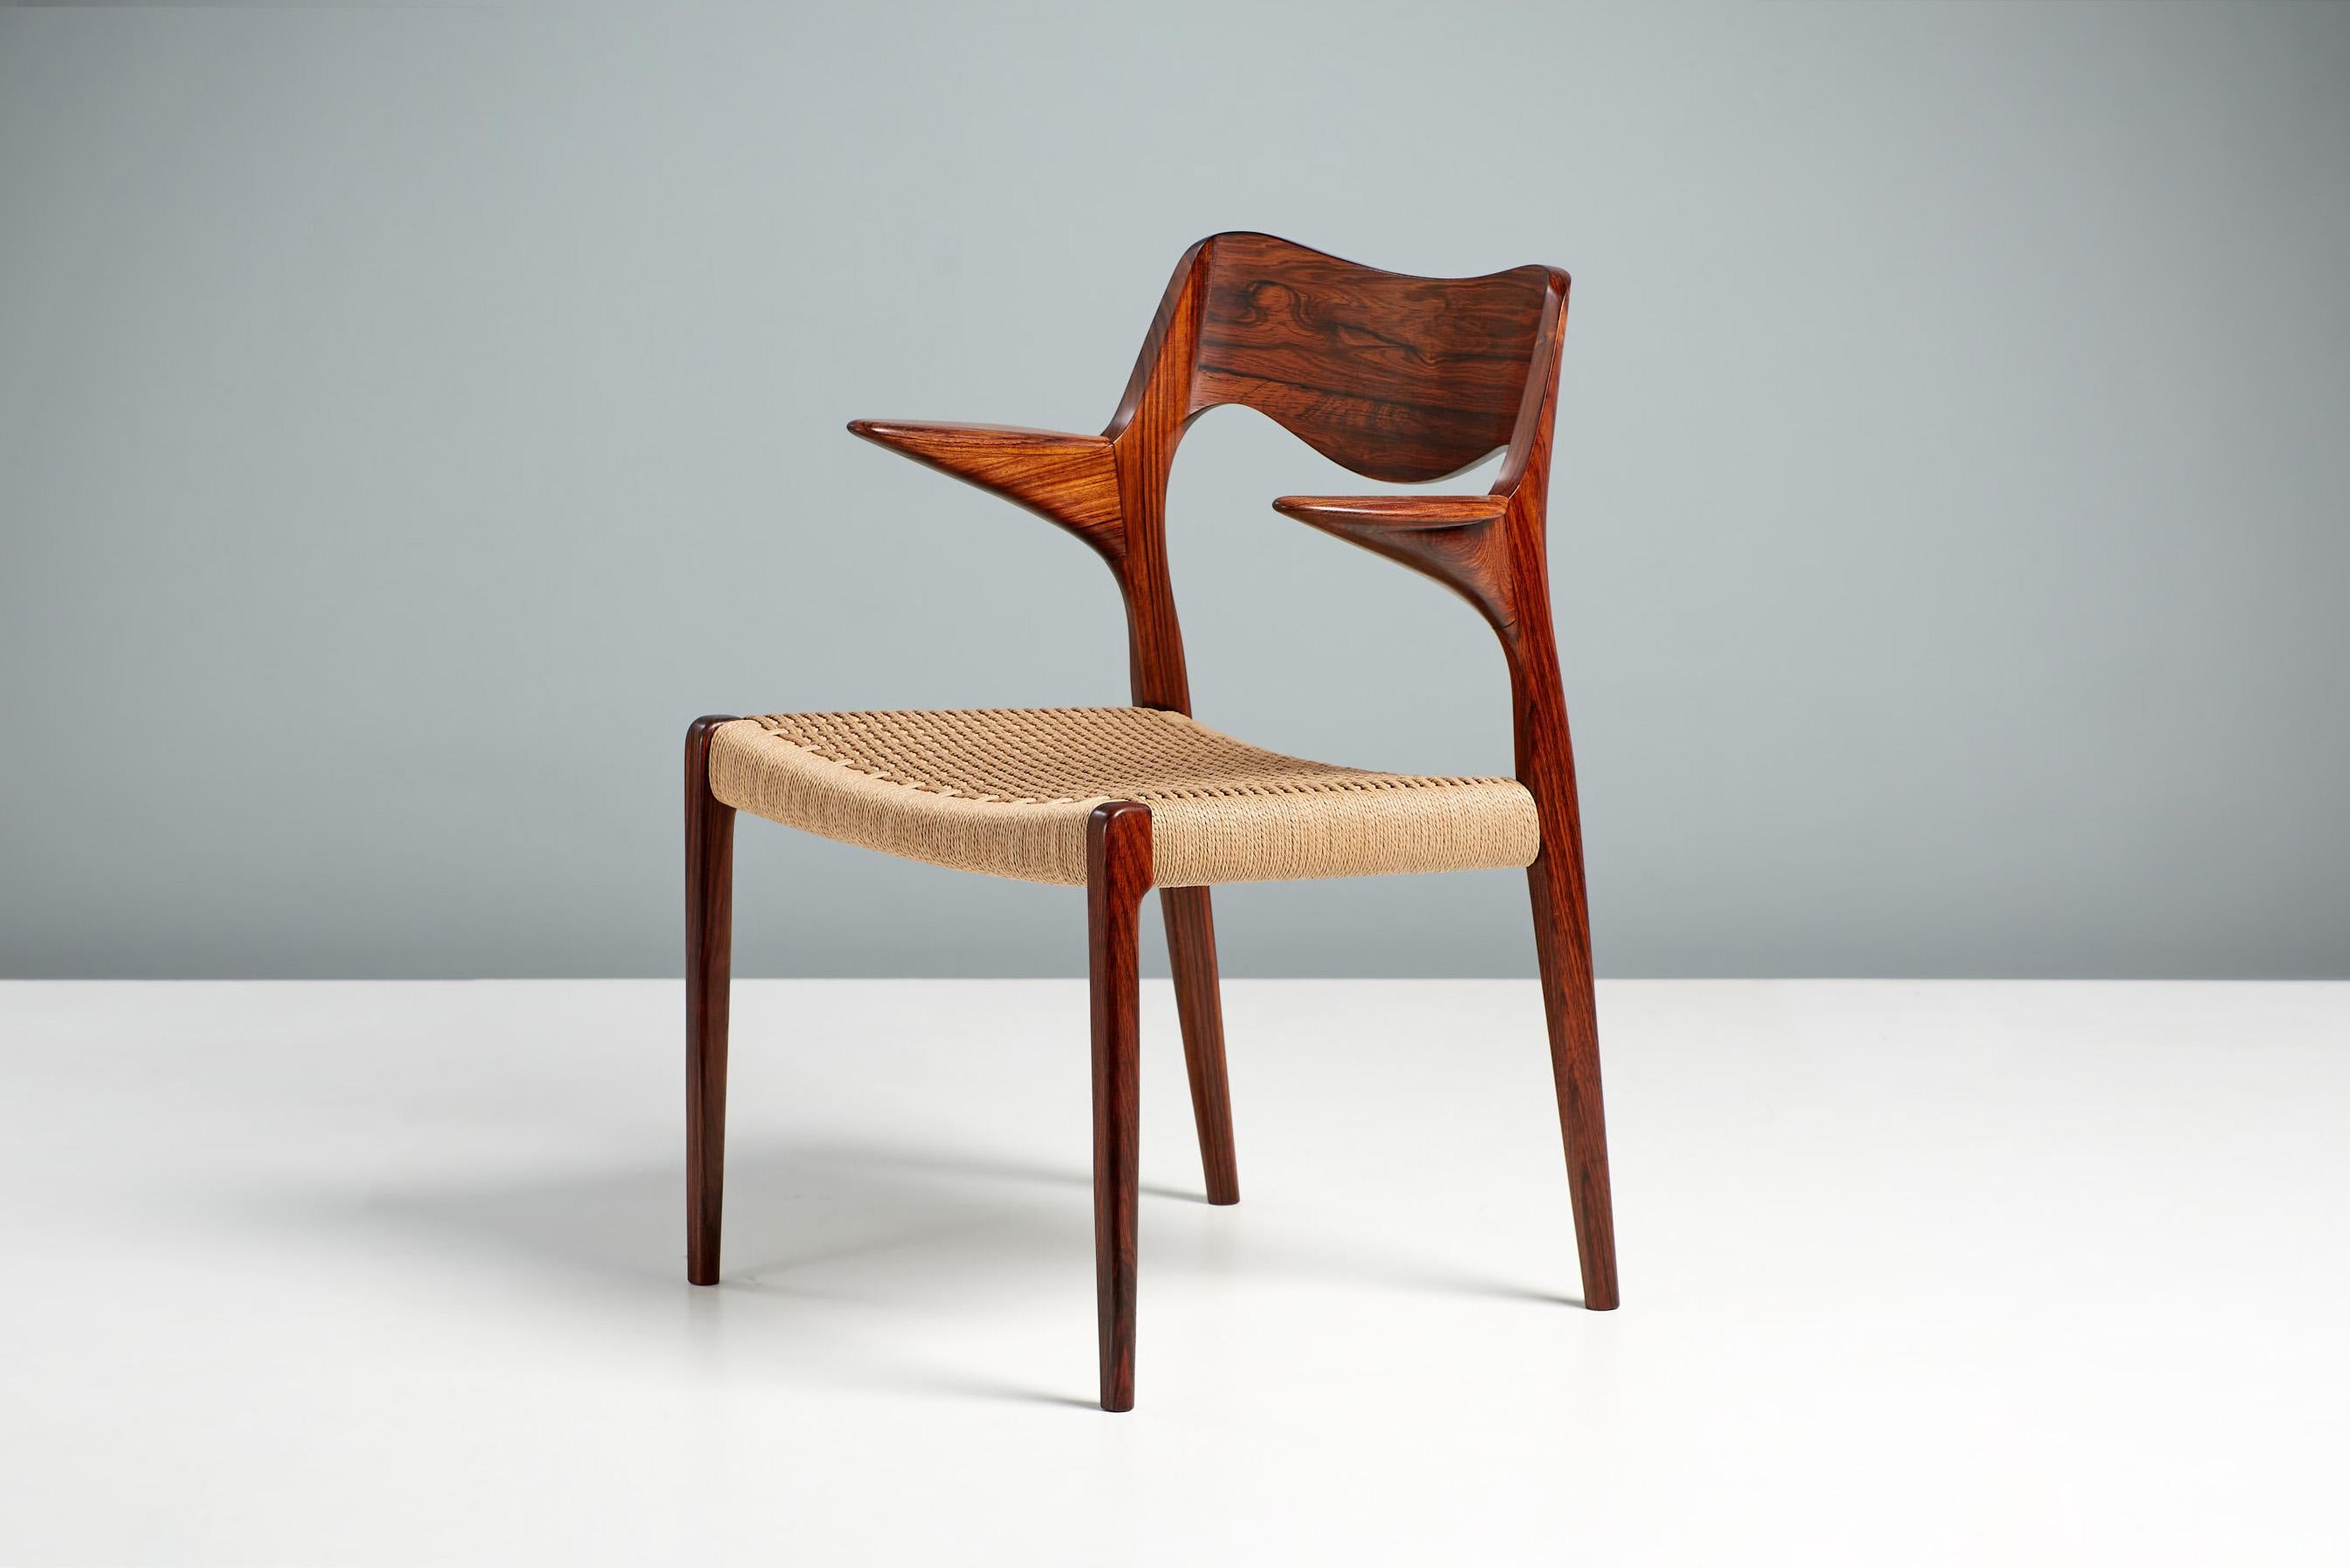 Niels Moller Model 55 Chair in Rosewood & Papercord, circa 1950s.

Rarely seen edition of this iconic design made from exquisite, highly figured rosewood. Designed by Niels Moller for his own company: J.L. Moller Mobelfabrik in Denmark, c1950s.